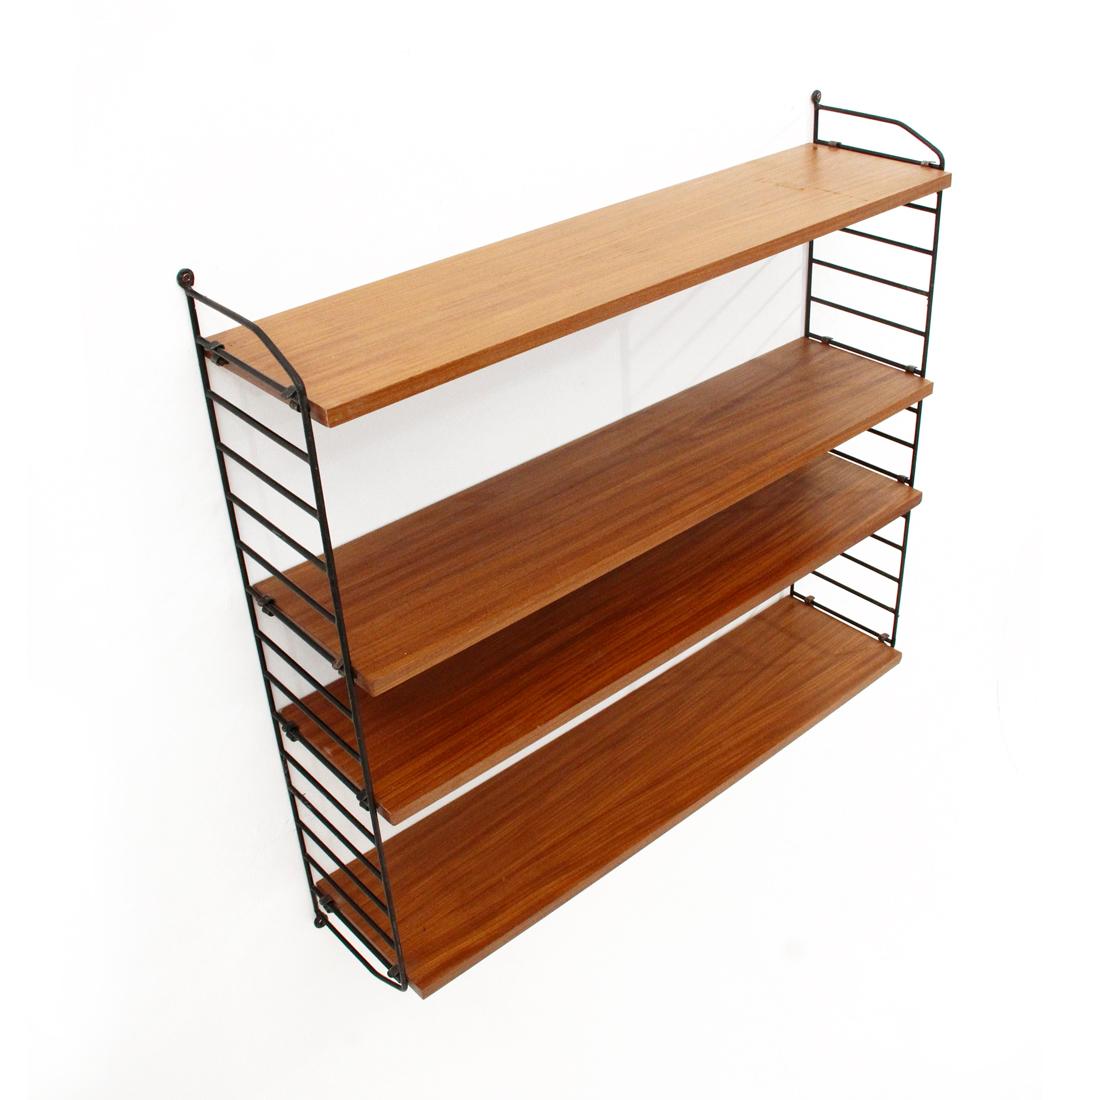 Library produced in the 1960s.
Uprights in black plasticized metal.
Shelves in teak veneered wood.
Good condition, signs and shortcomings of wood due to normal use over time.

Dimensions: Length 81.5 cm, depth 20 cm, height 77 cm.